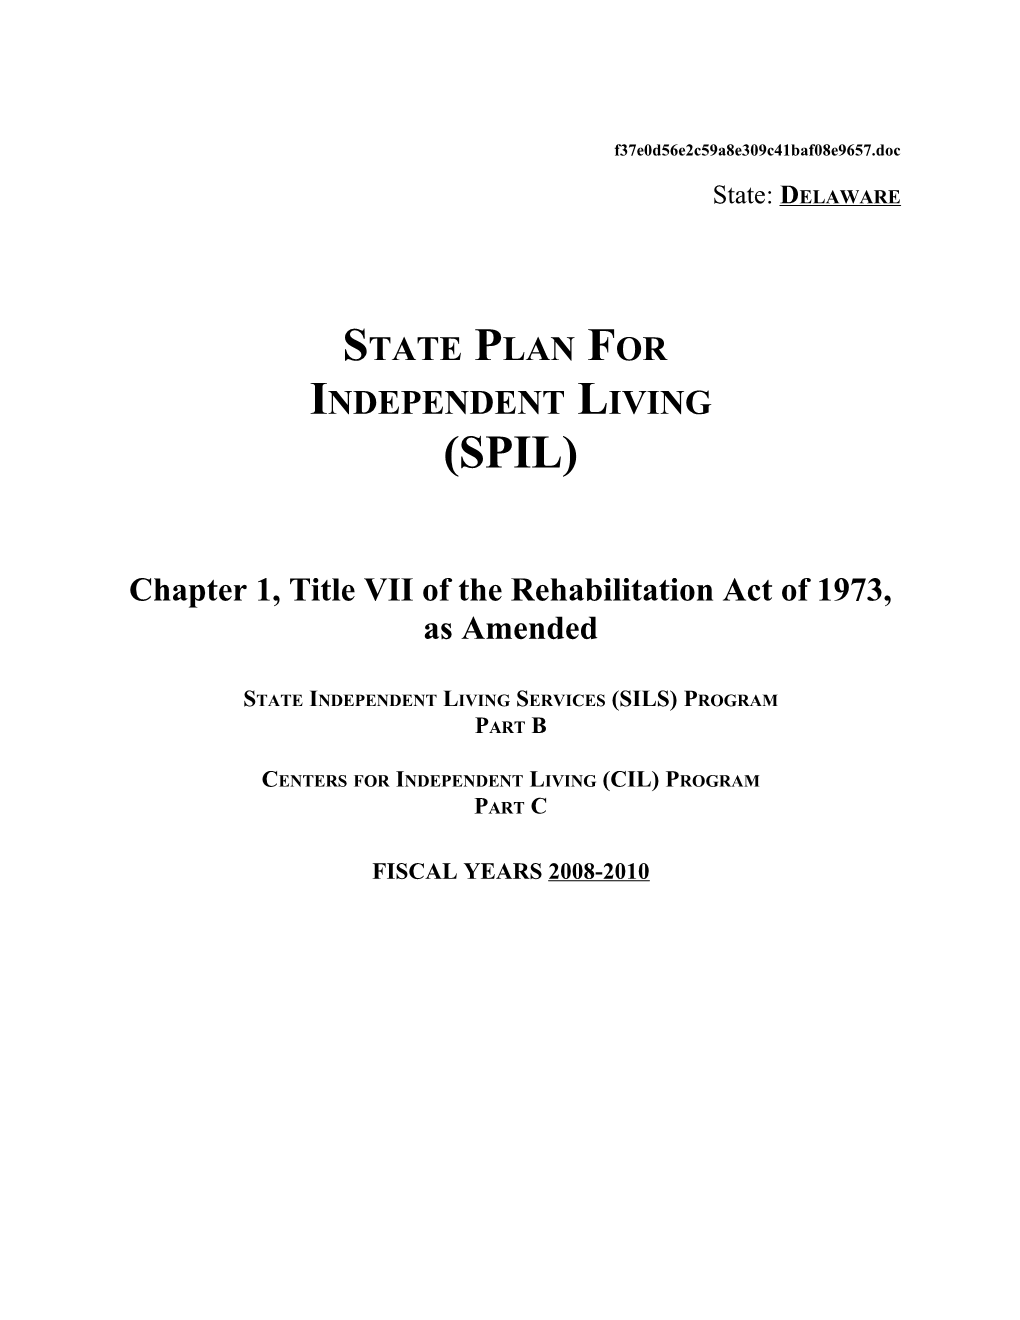 State Plan For Independent Living Performance Plan (MS Word)